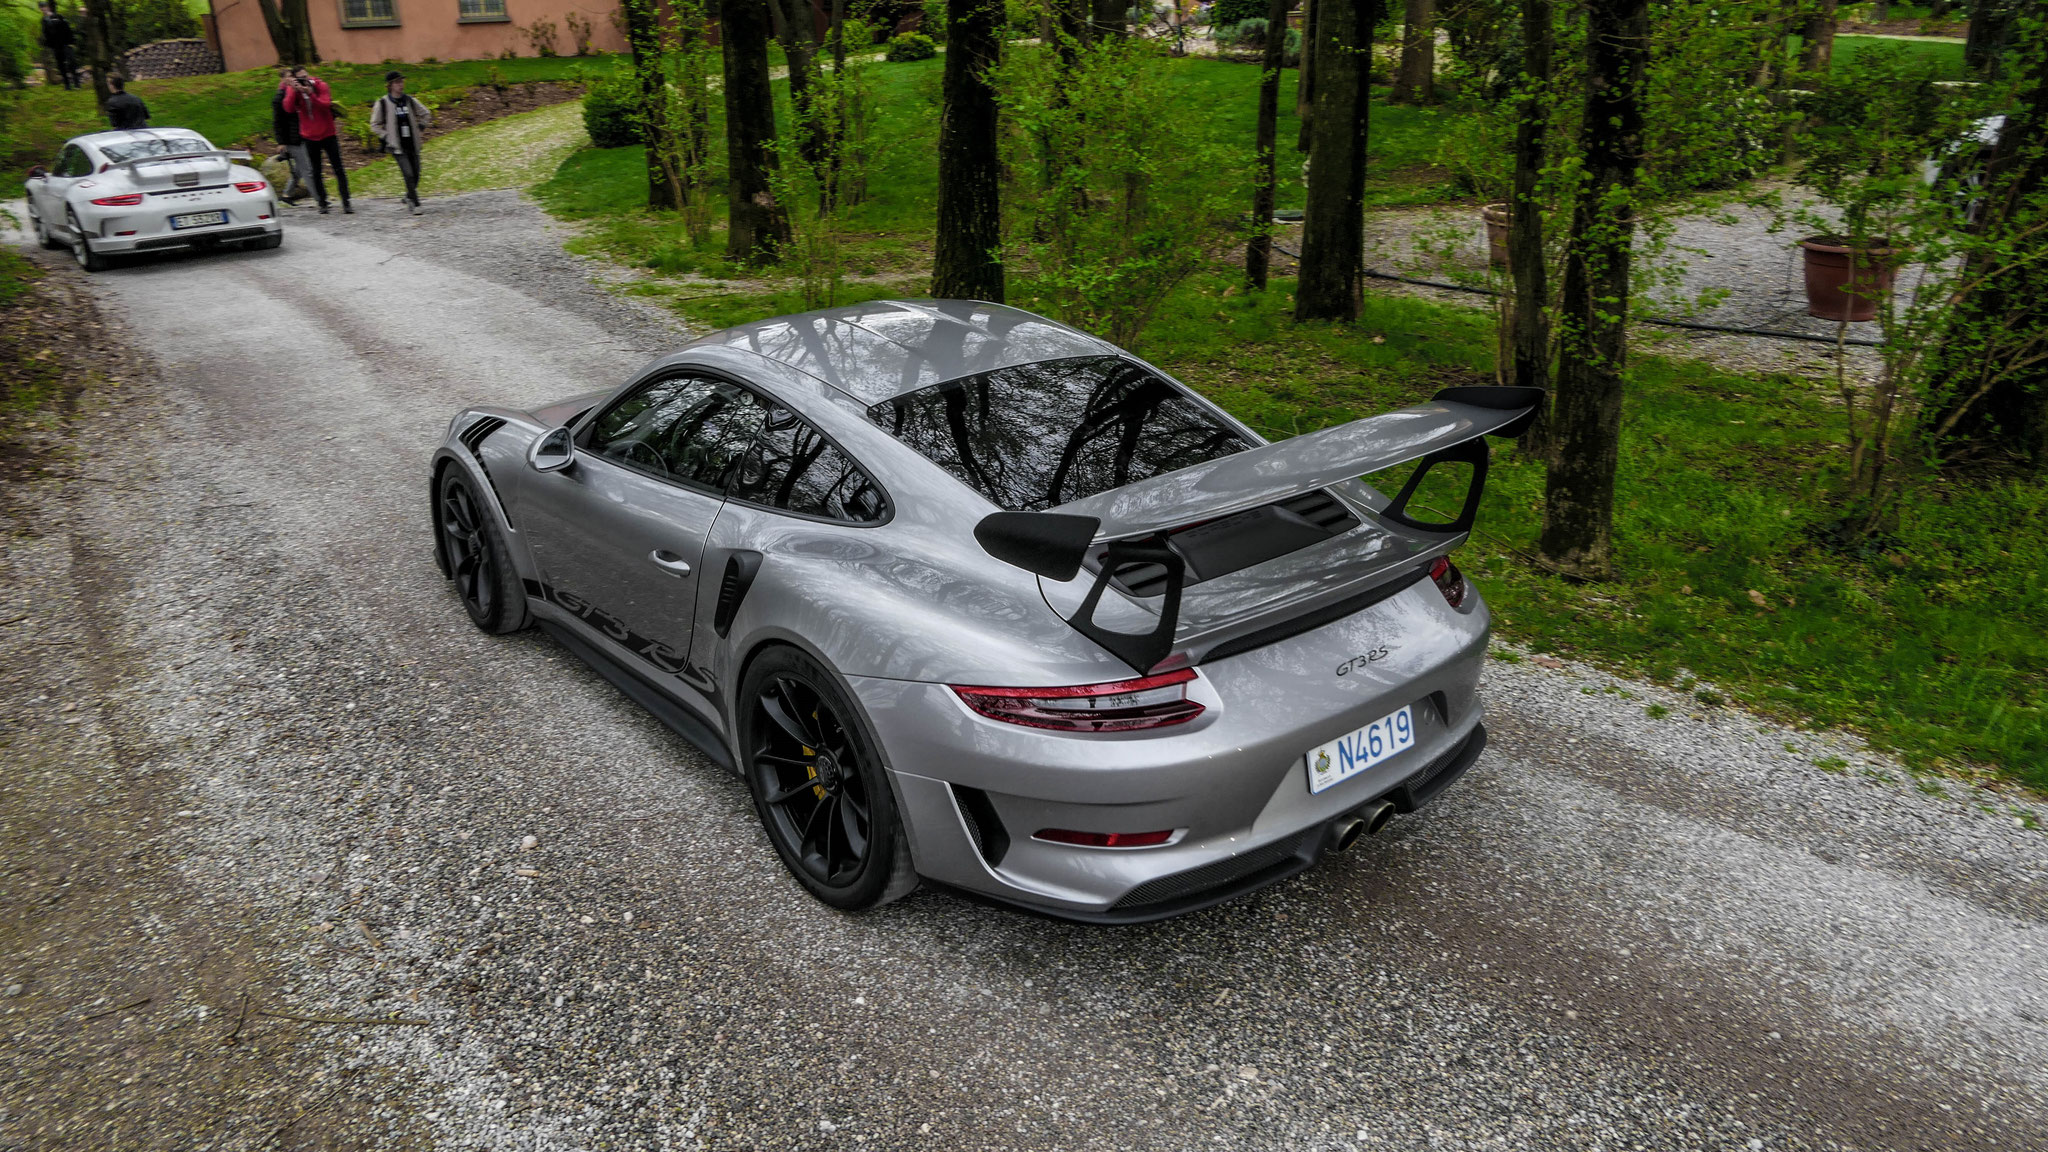 Porsche 911 991.2 GT3 RS - N4619 (AND)